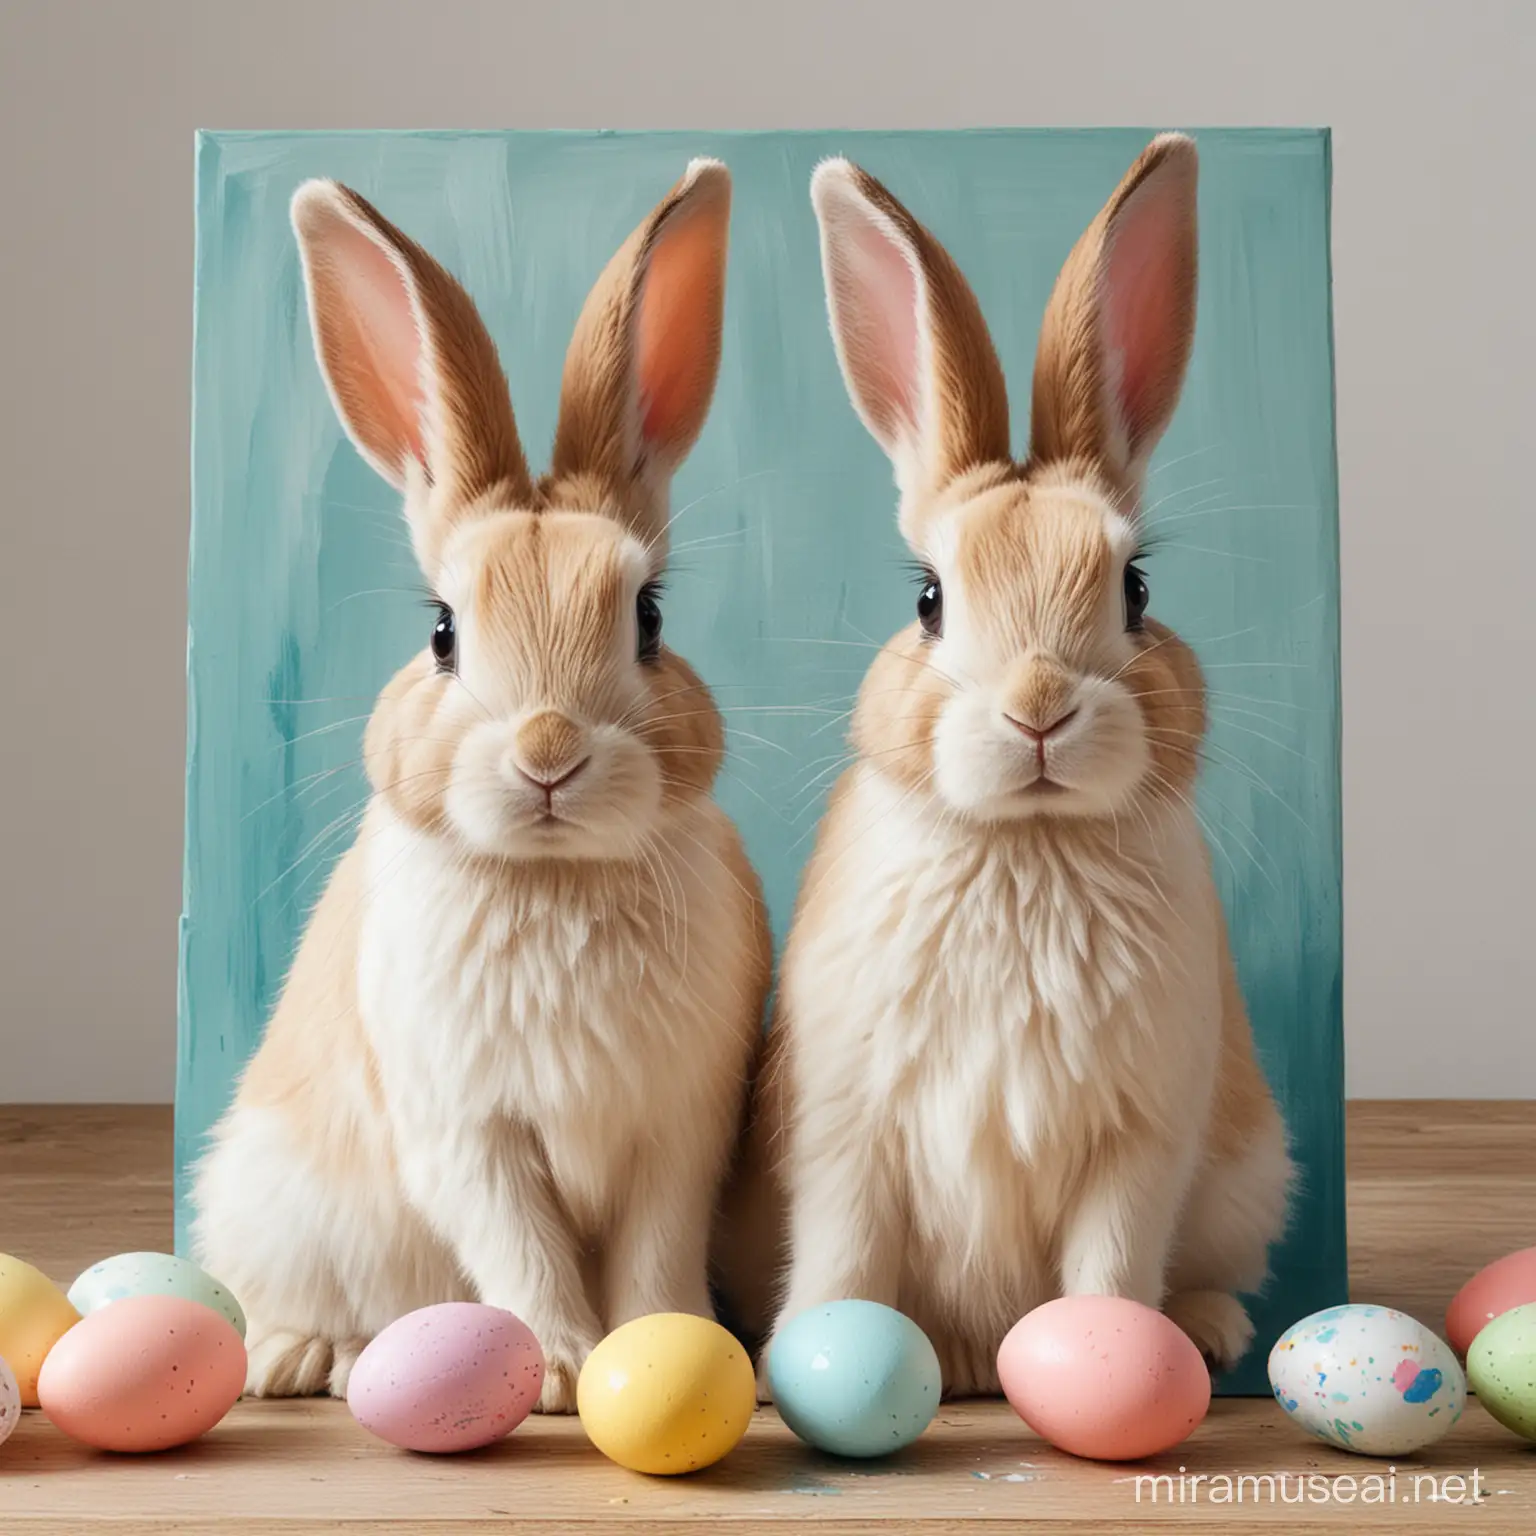 Make a painting for Easter with bunnies